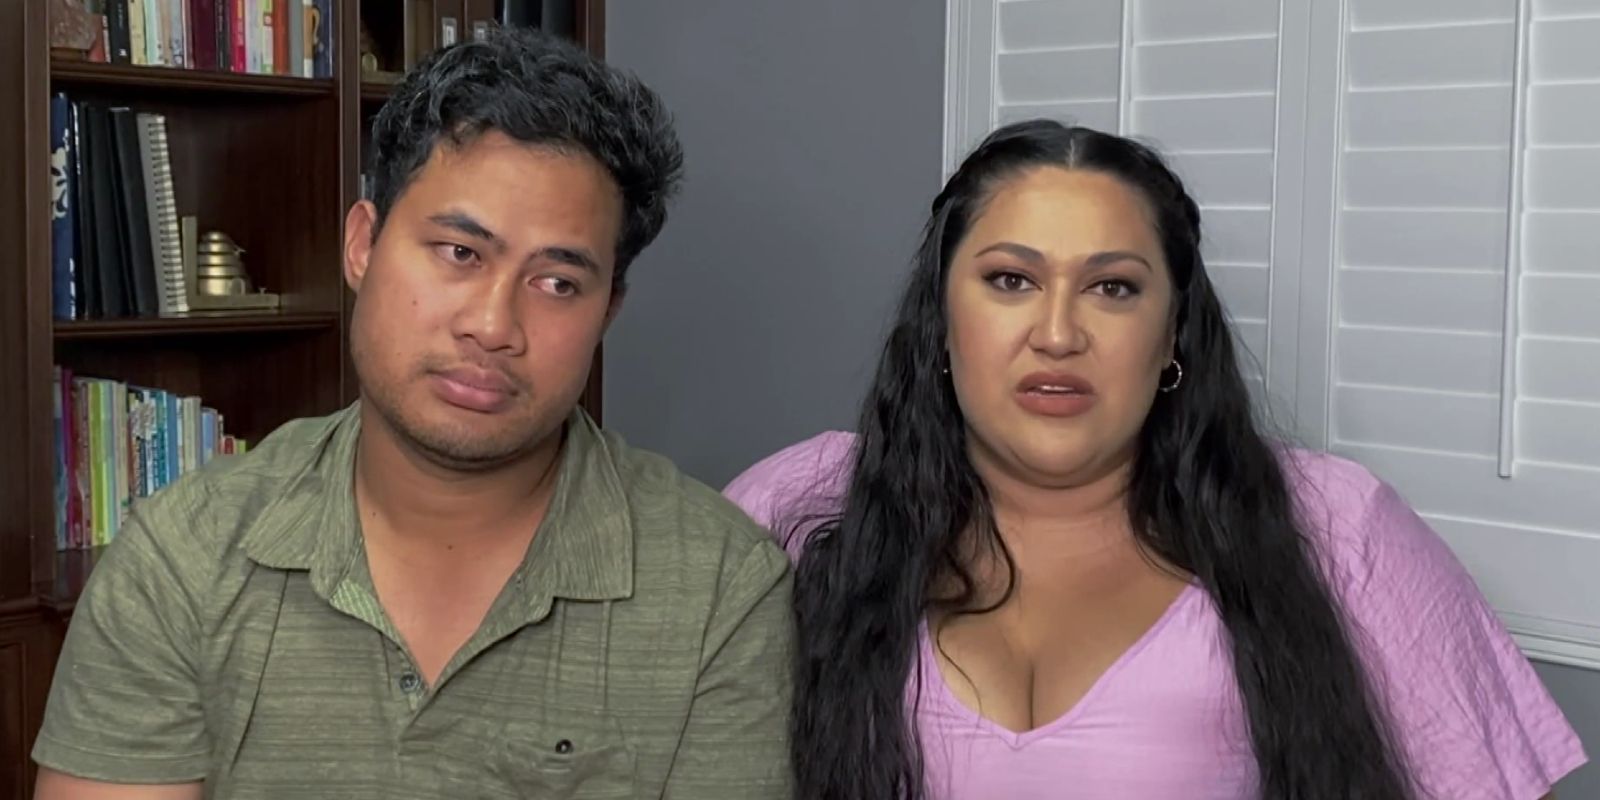 Kalani Faagata in a pink dress and Asuelu Pulaa in a green shirt from 90 Day Fiance sitting together